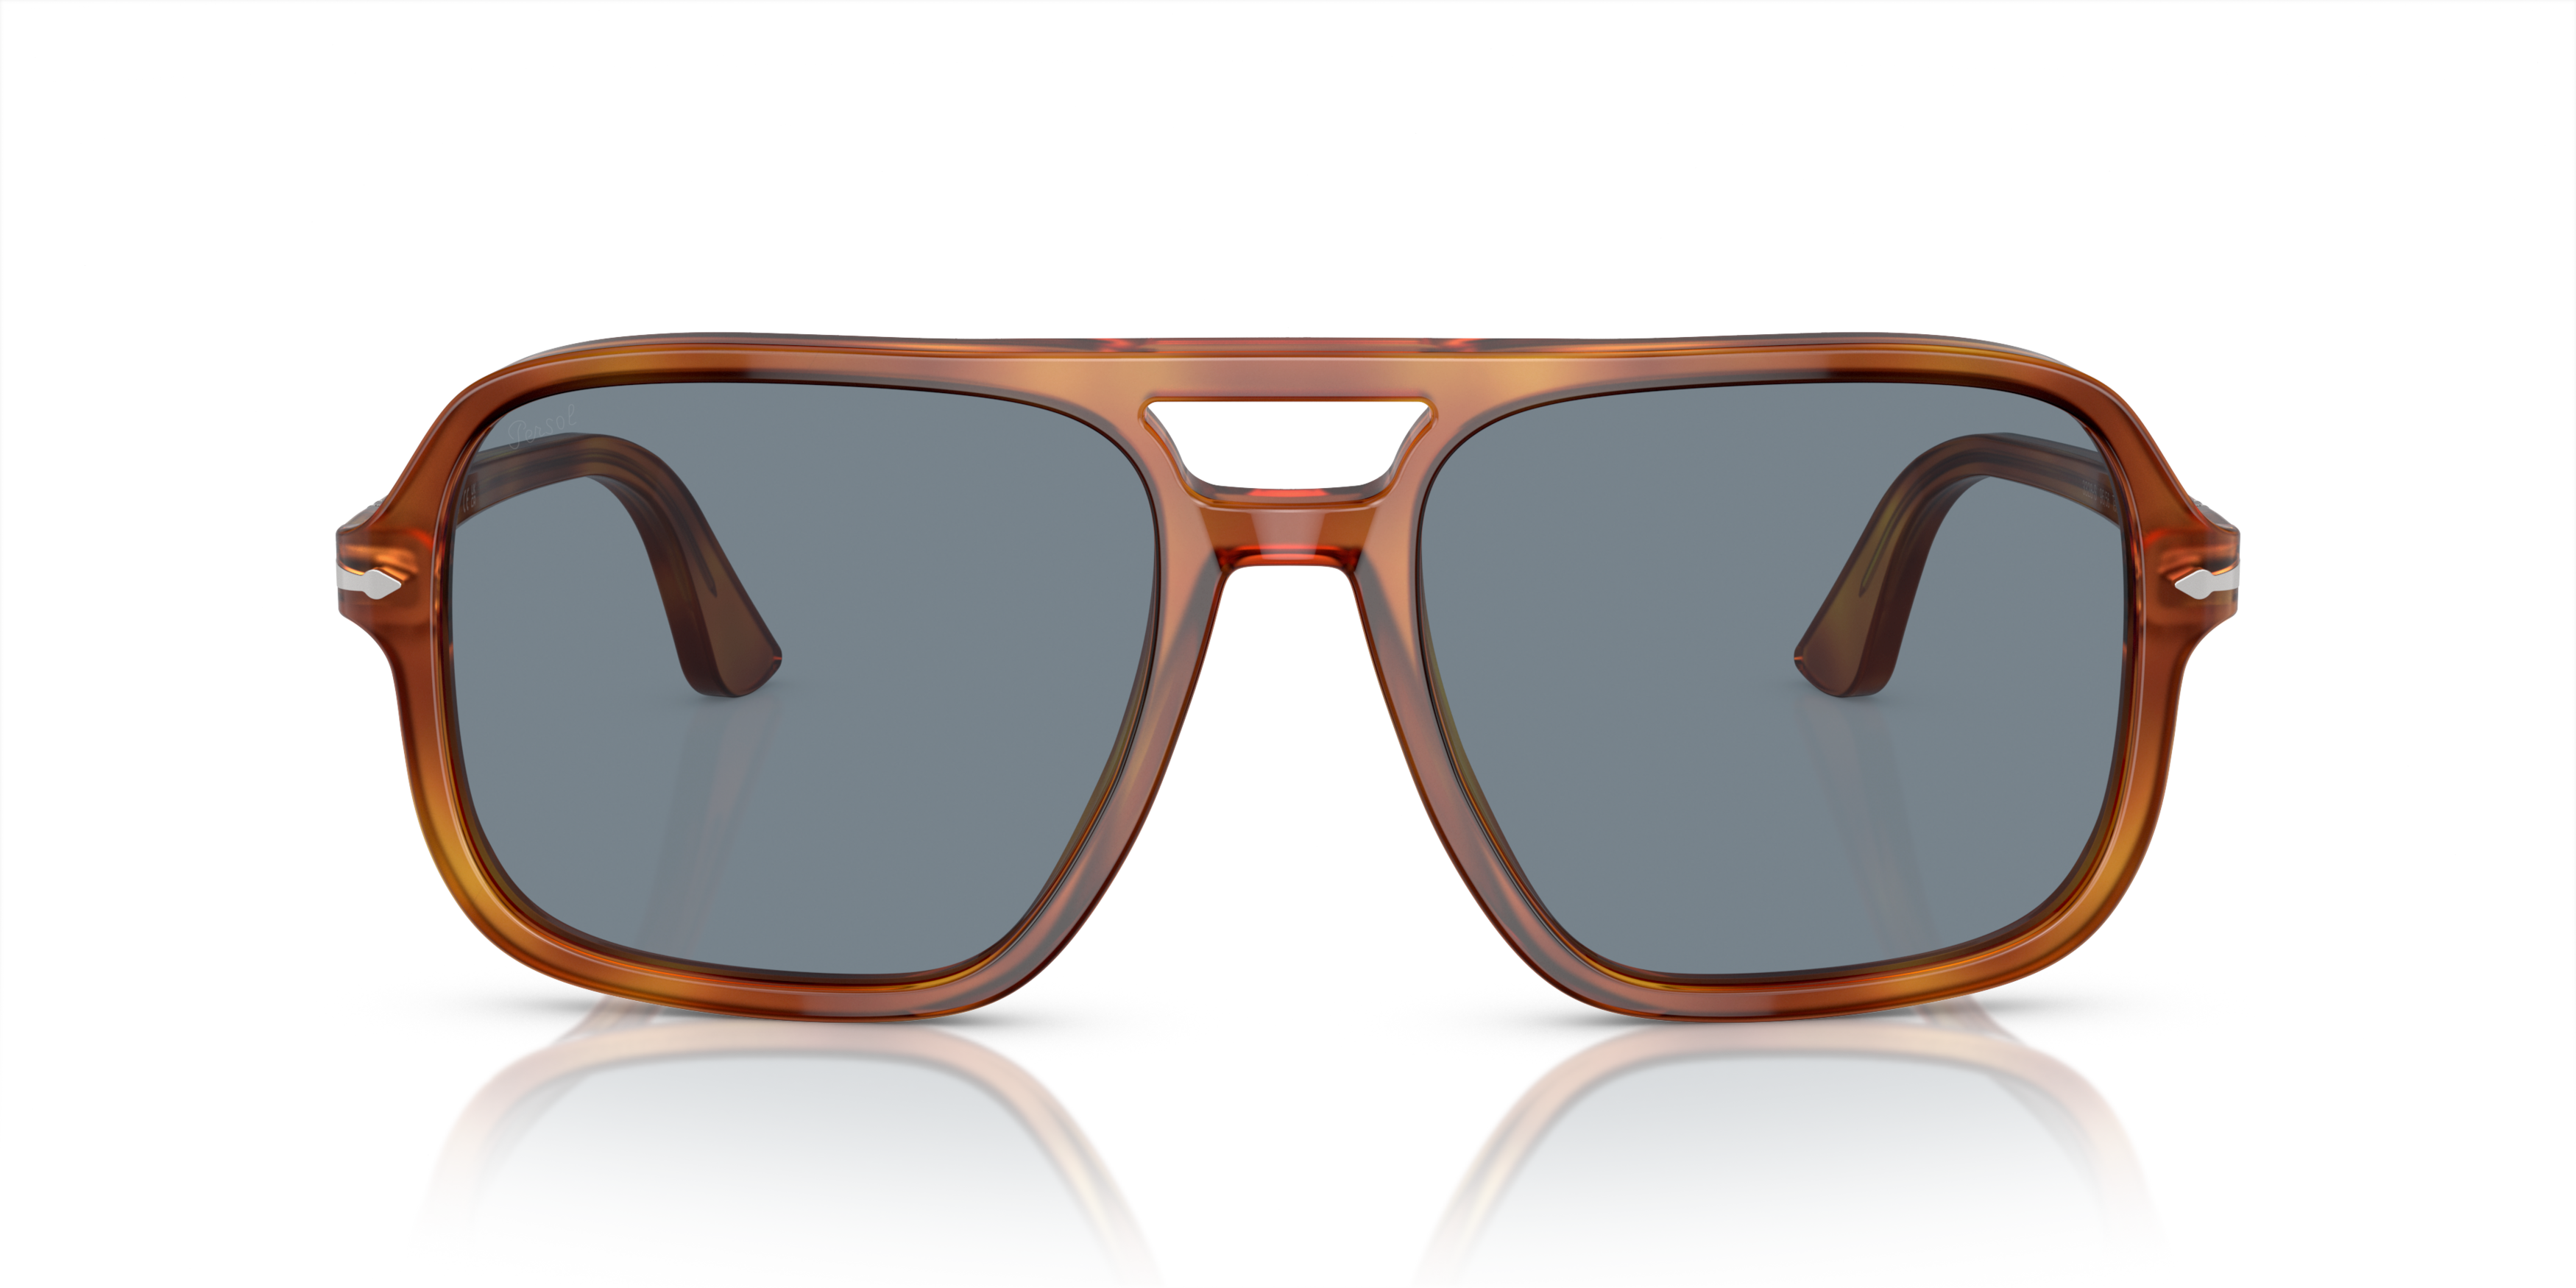 [products.image.front] Persol PO3328S 96/56